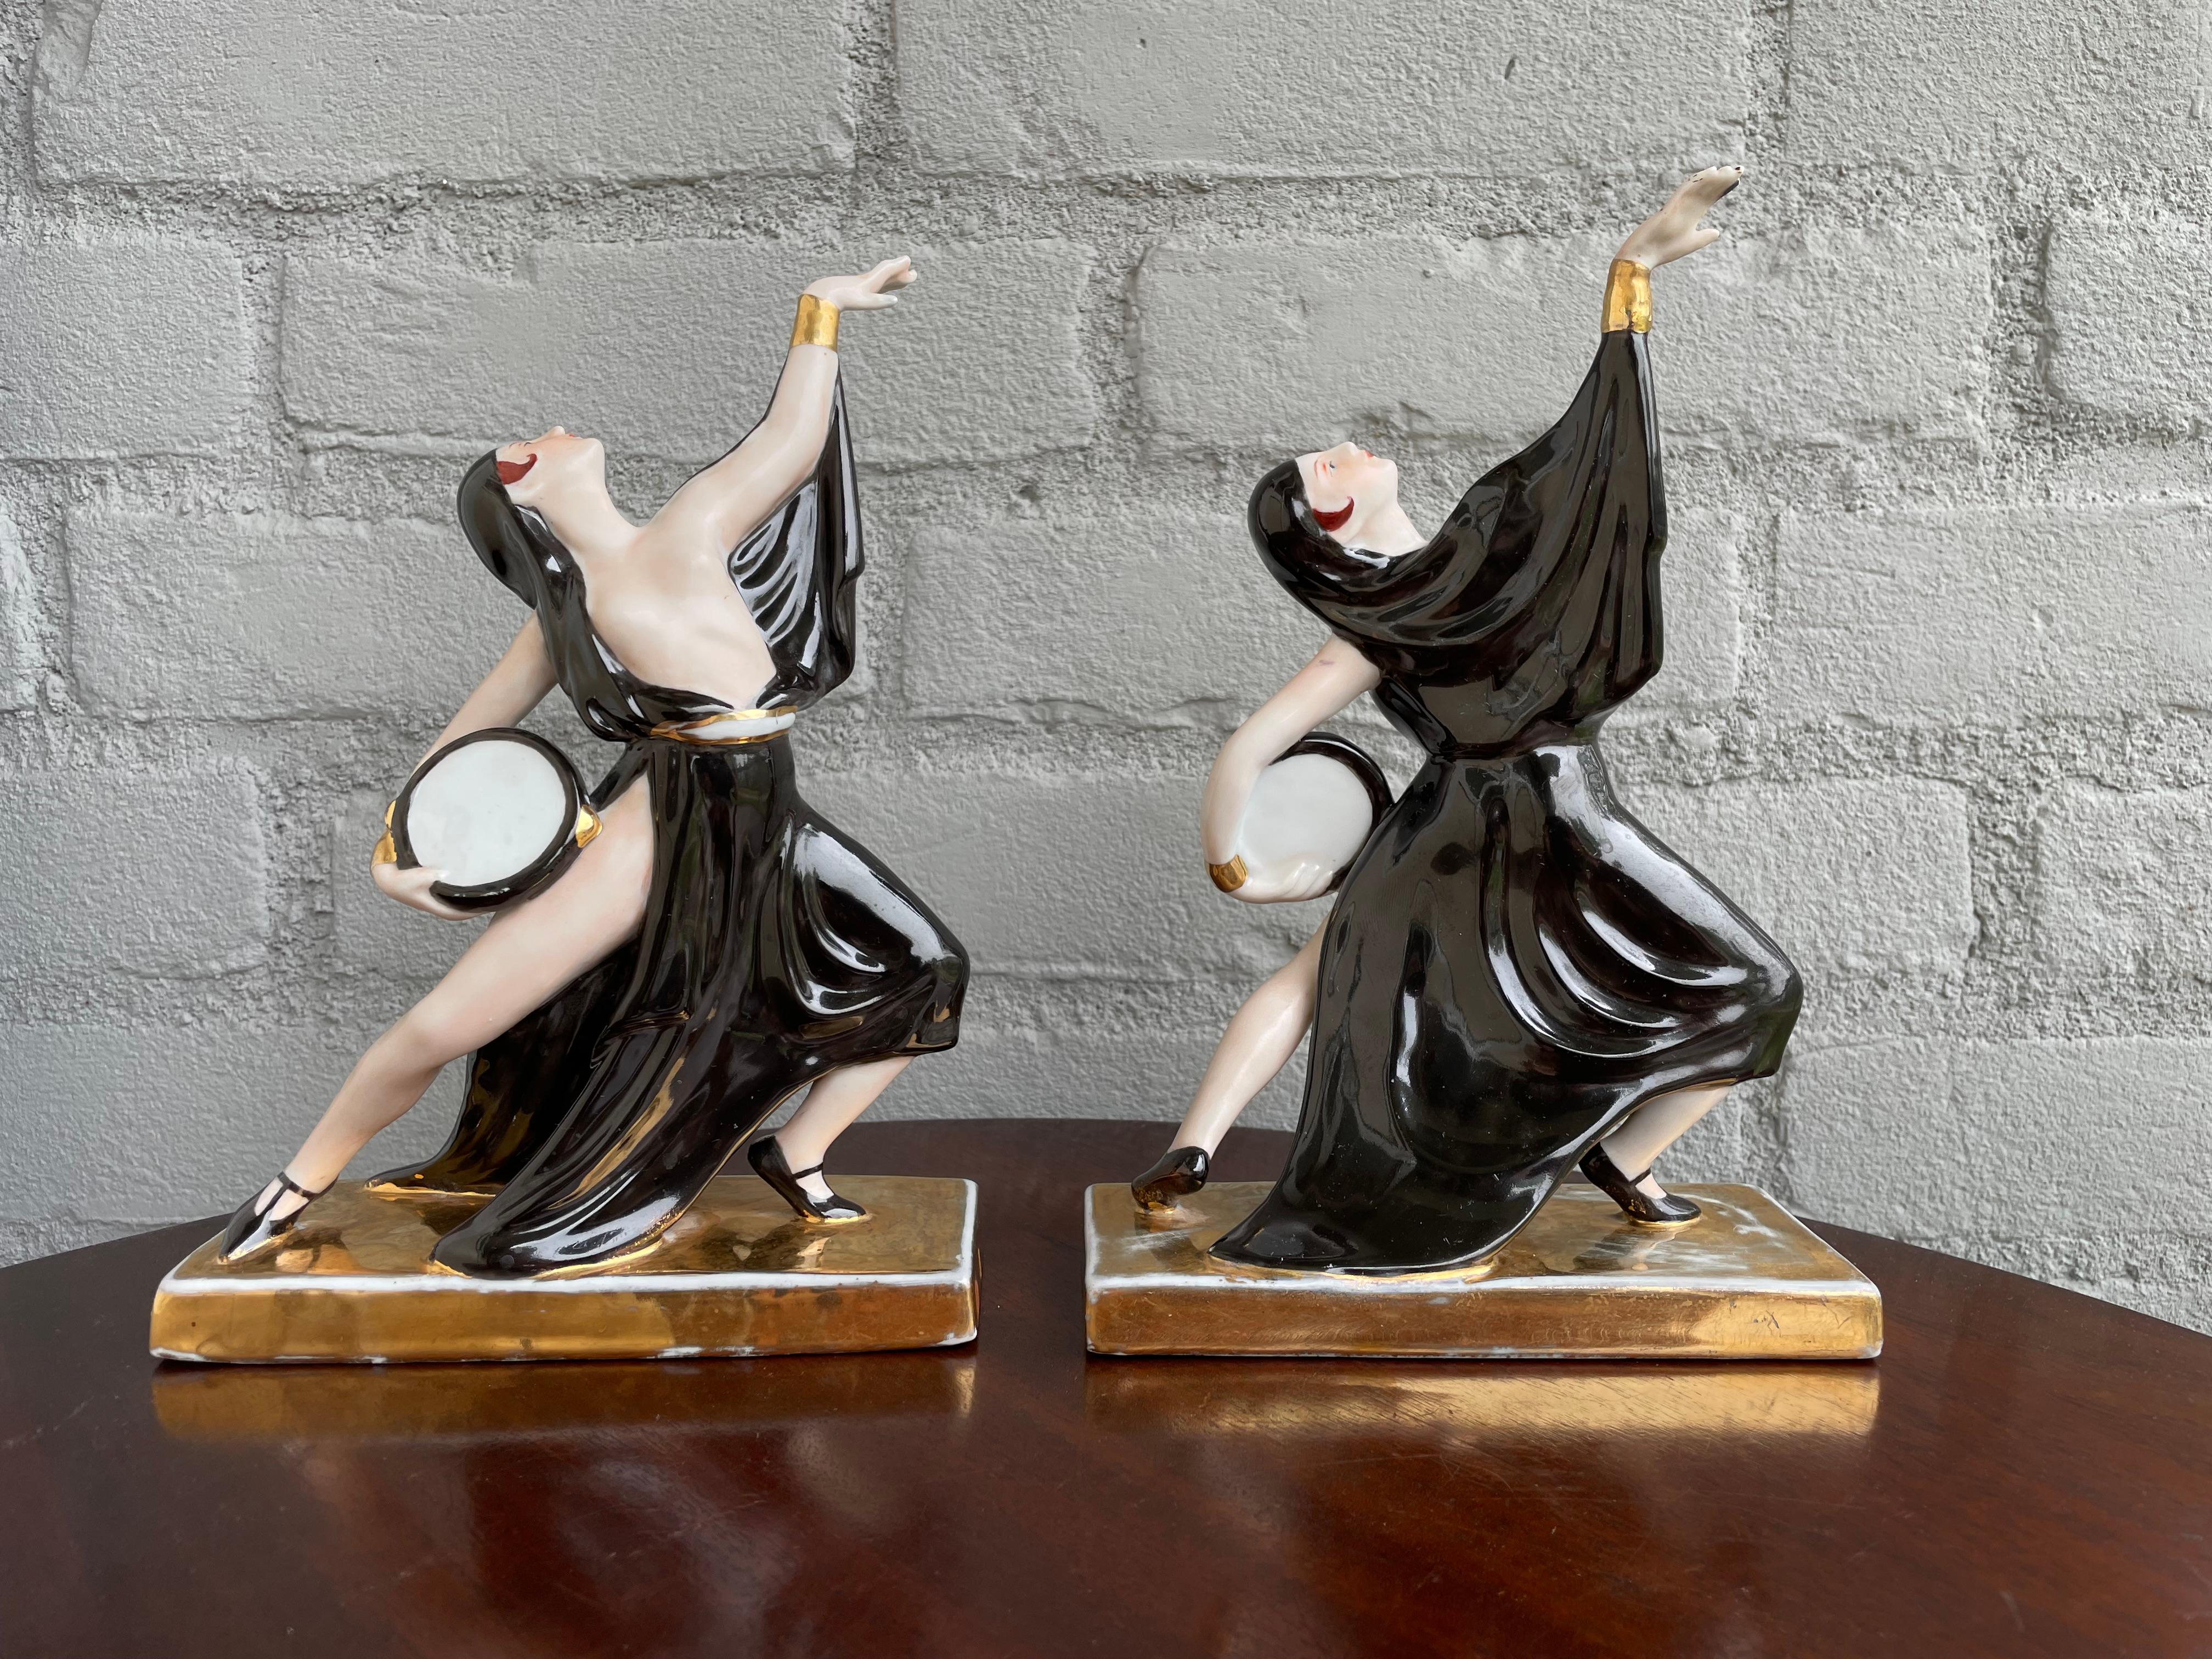 These Art Deco risque dancers (or 'Moulin Rouge') bookends are very rare and very pretty to look at.

This finest quality porcelain pair of female risque dancers from the heydays of the French Art Deco era is another one of our recent great finds